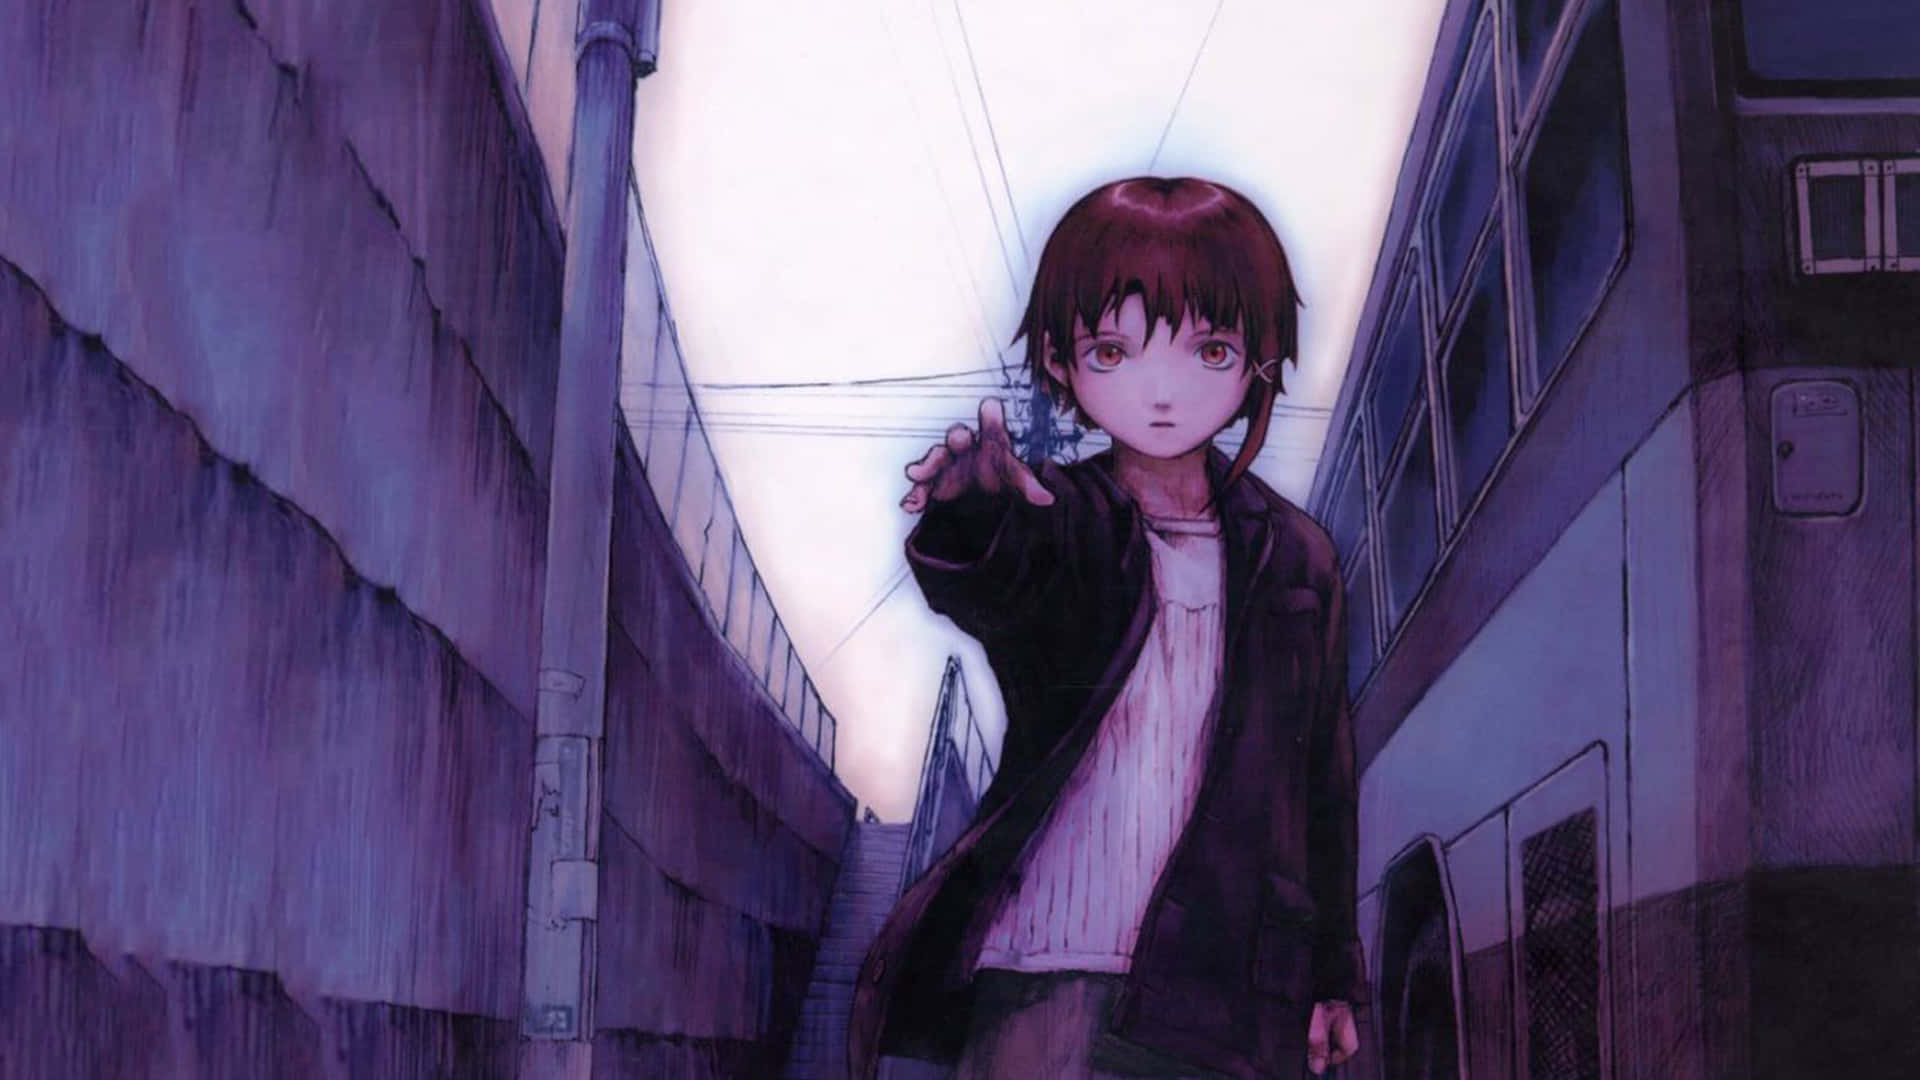 Explore a surreal digital world with Serial Experiments Lain Wallpaper